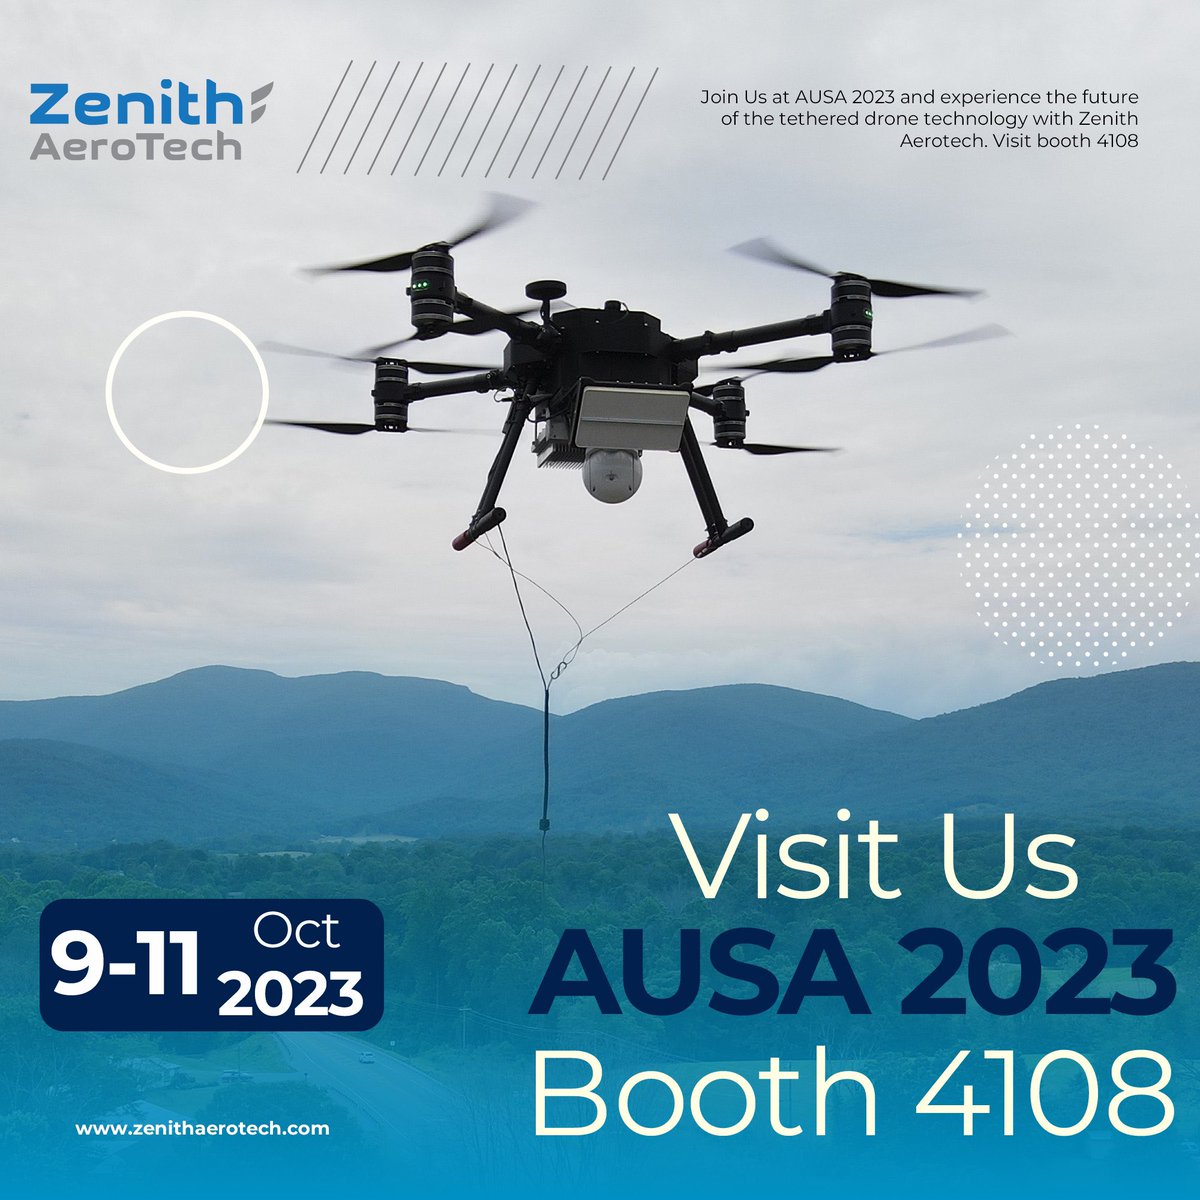 Join us at AUSA 2023 in Washington D.C. from October 9-11. Explore the future of military and defense with Zenith Aerotech's cutting-edge tethered drones at booth 4108. #AUSA2023 #ZenithAerotech #MilitaryInnovation #TetheredDrones